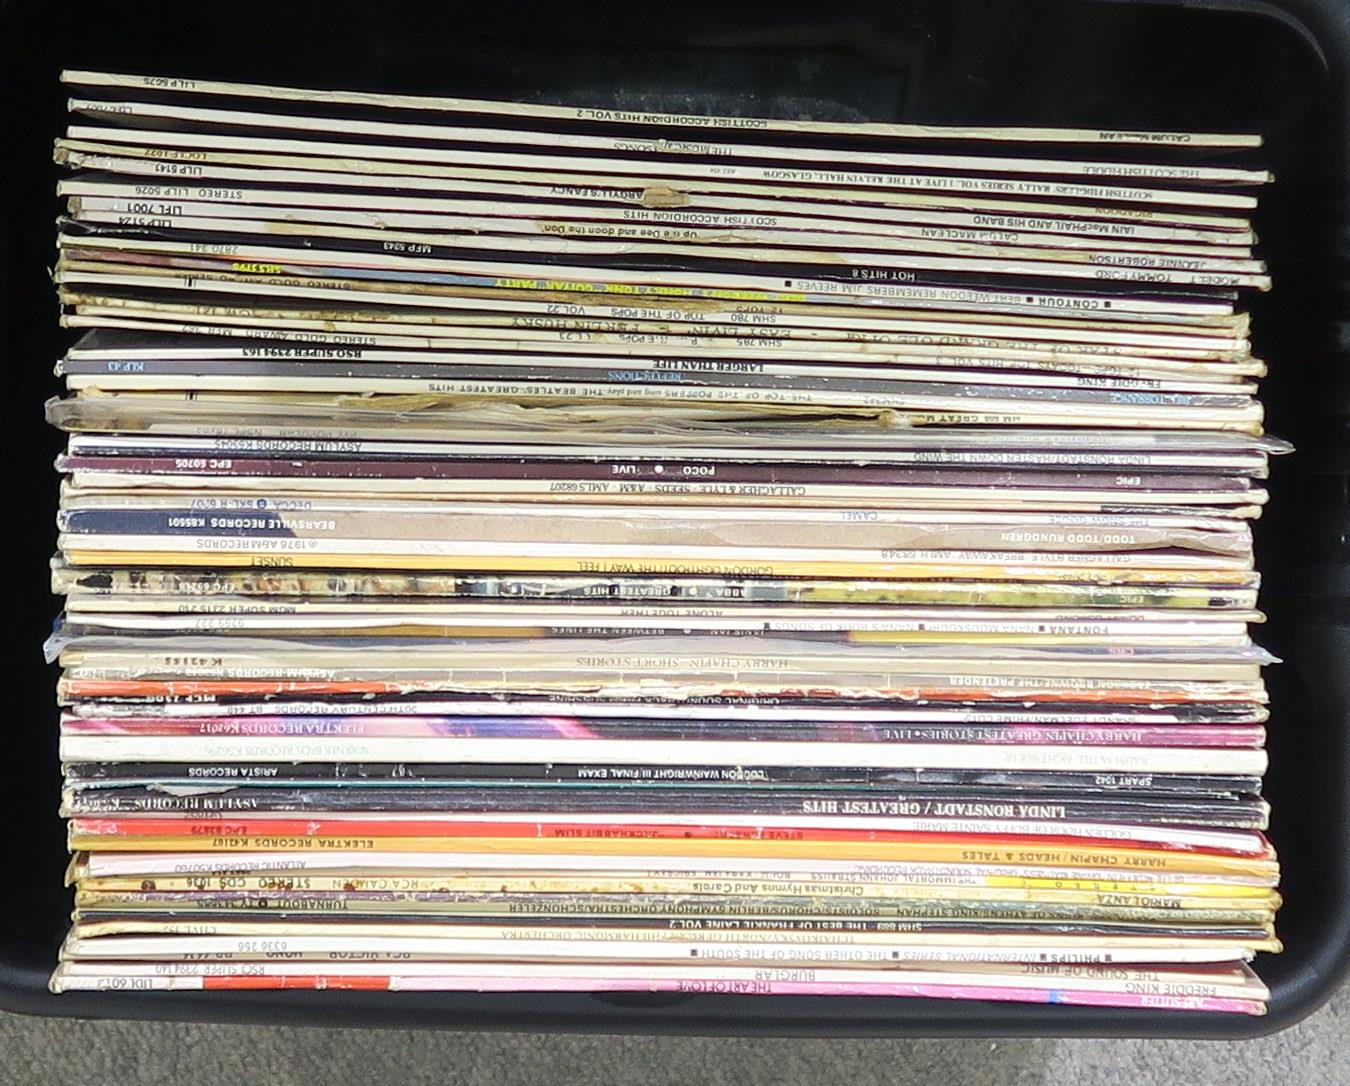 VINYL RECORDS a lot vinyl LP and EP 12" pop, rock, folk, country, soundtrack and spoken word with - Image 3 of 5